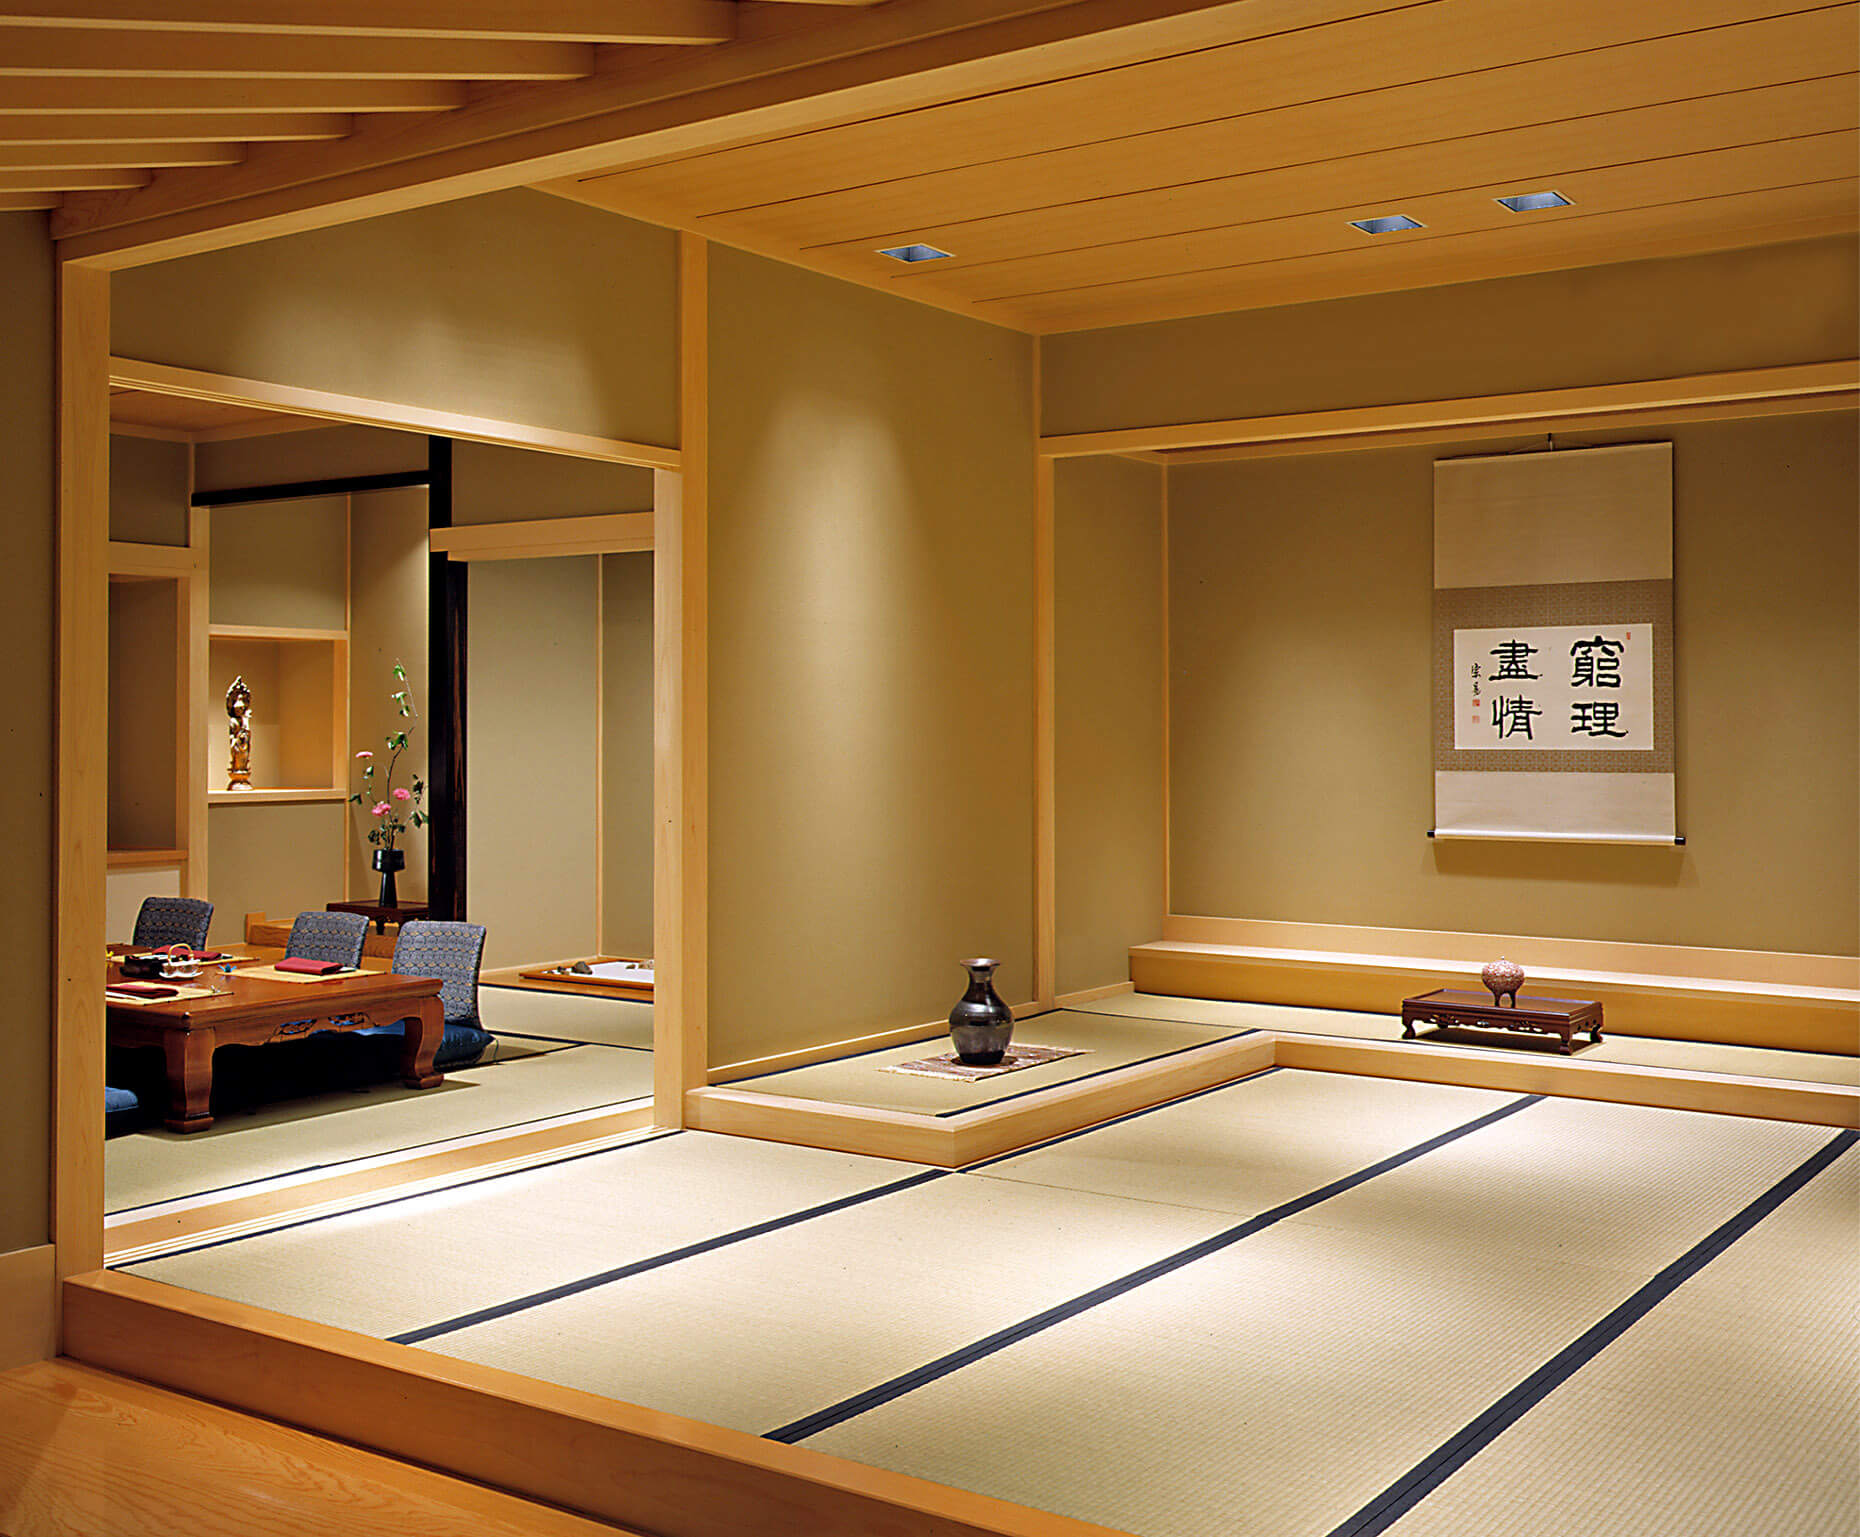 A tranquil view of the elegantly designed interior of Nakato Restaurant in Atlanta, Gerogia